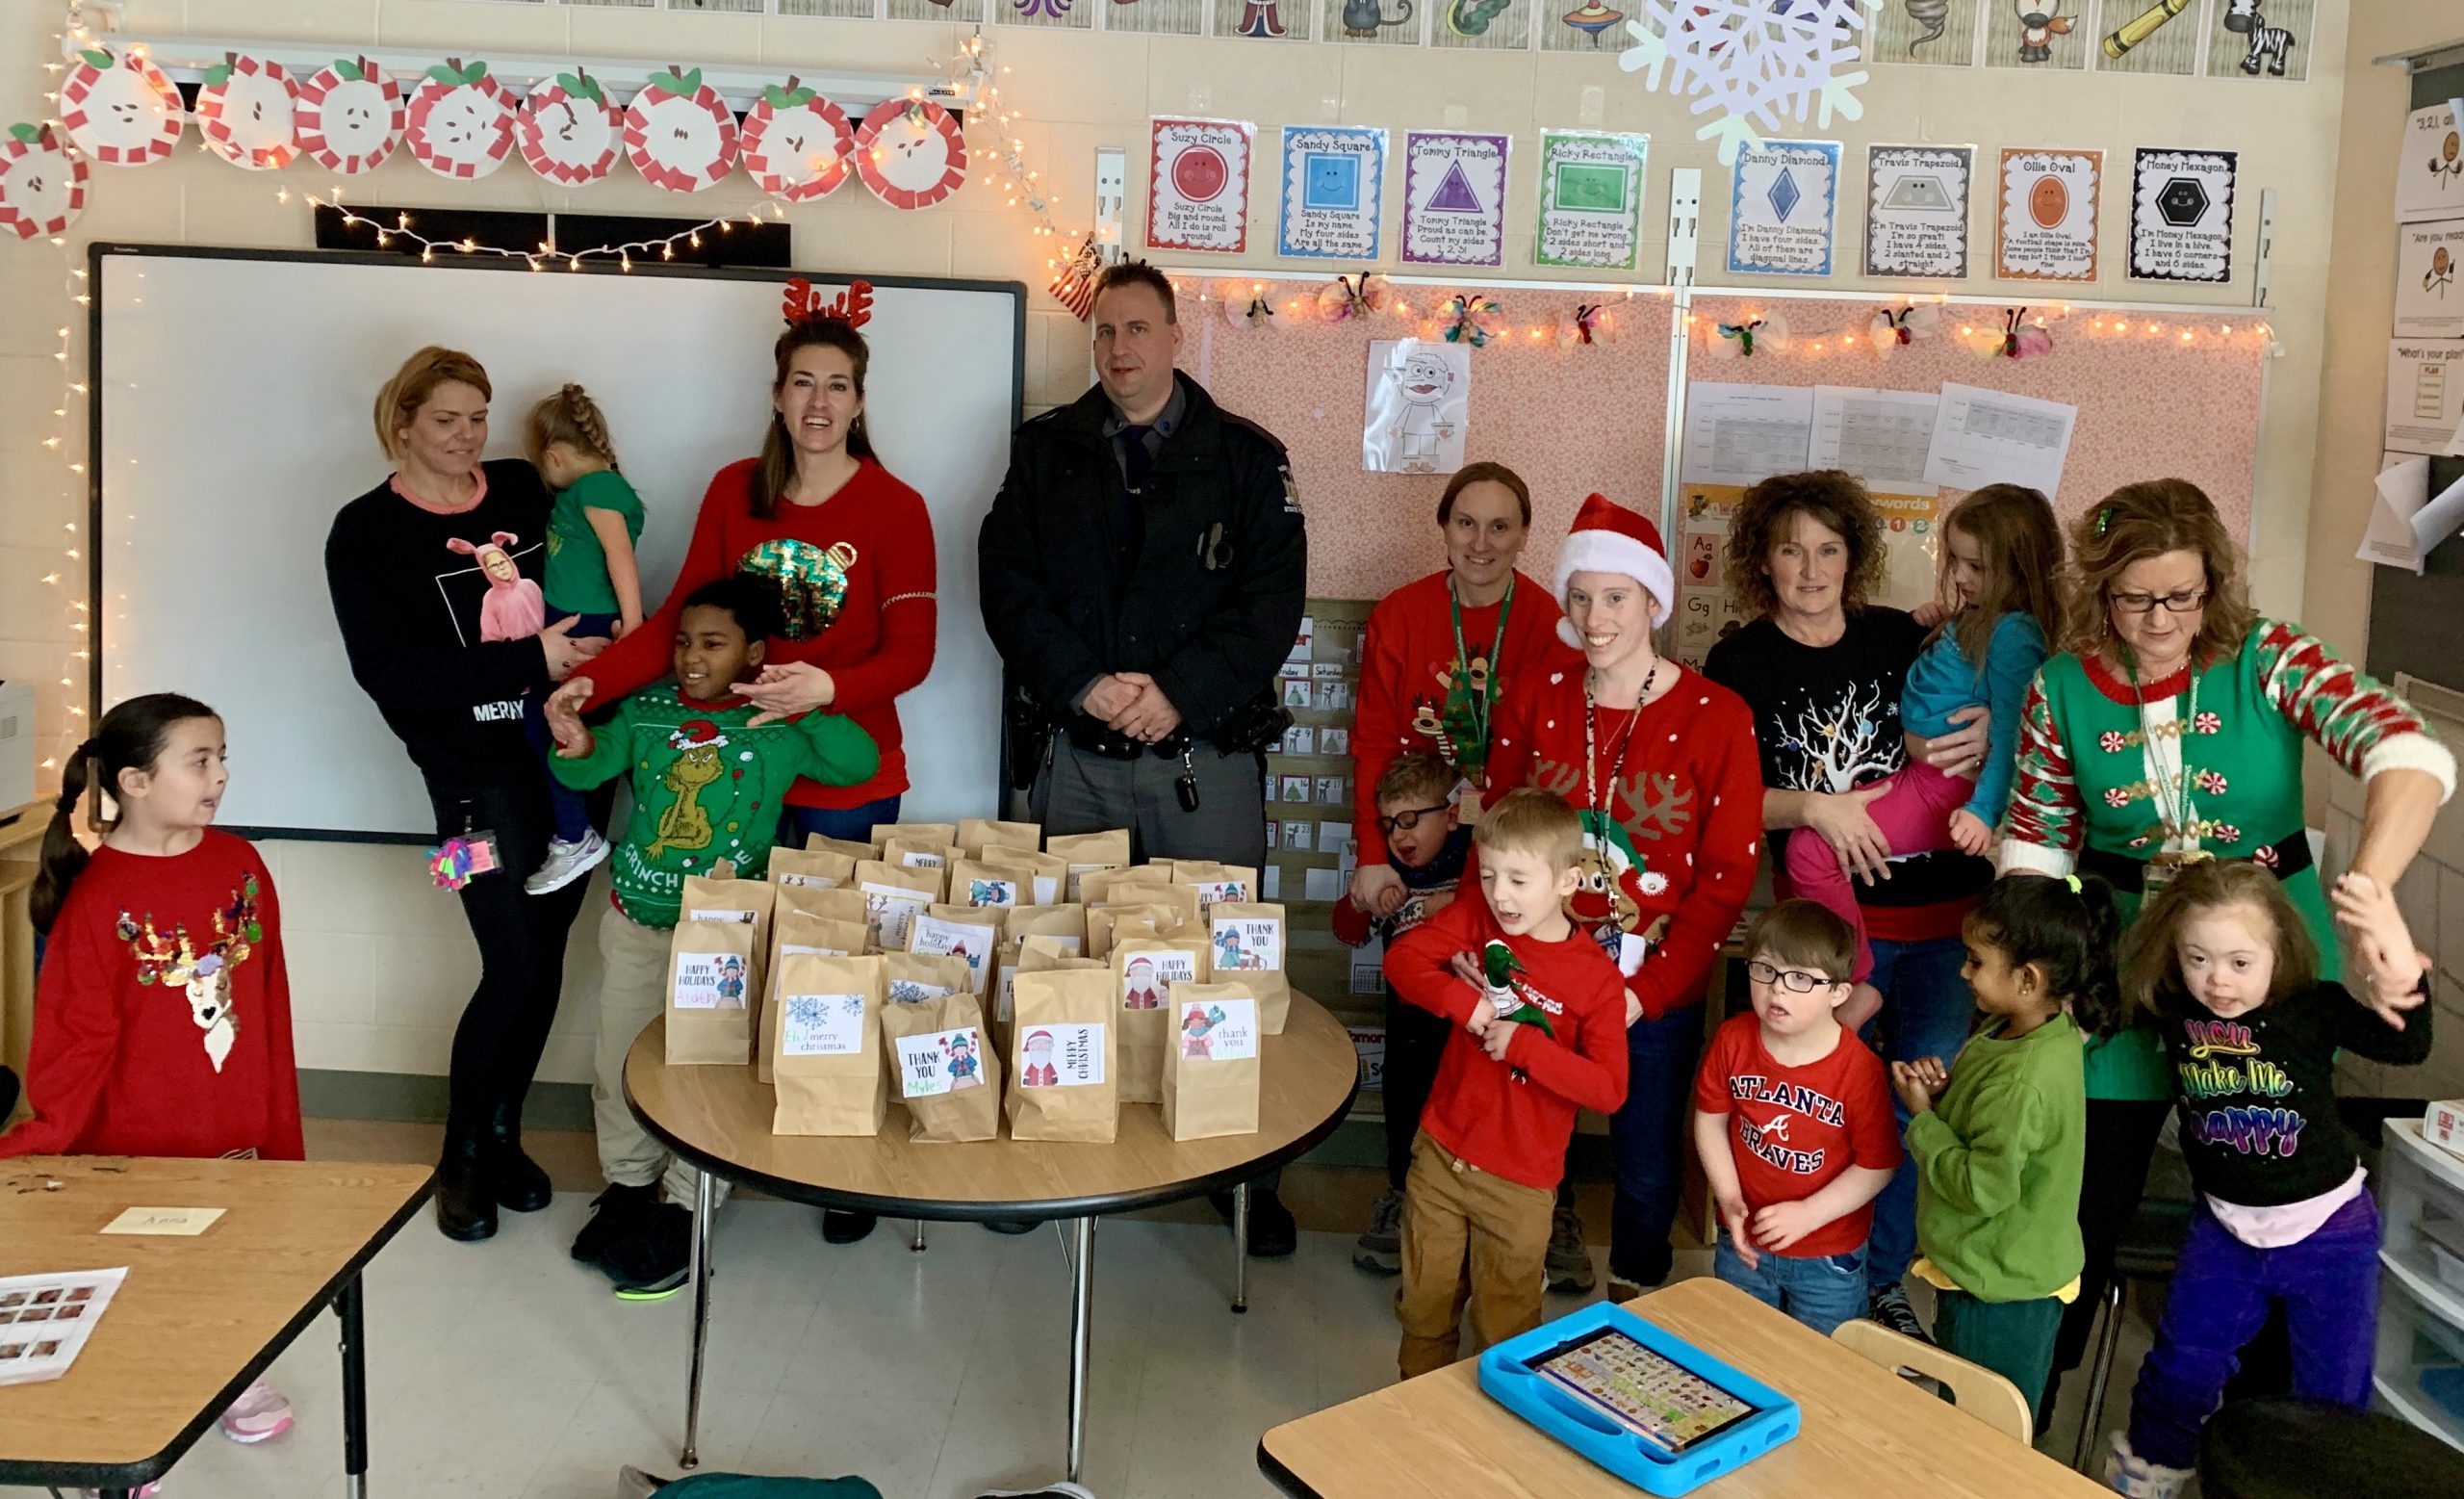 Mrs. Cornell's class made care packages for the Saratoga County Sheriff's Office.